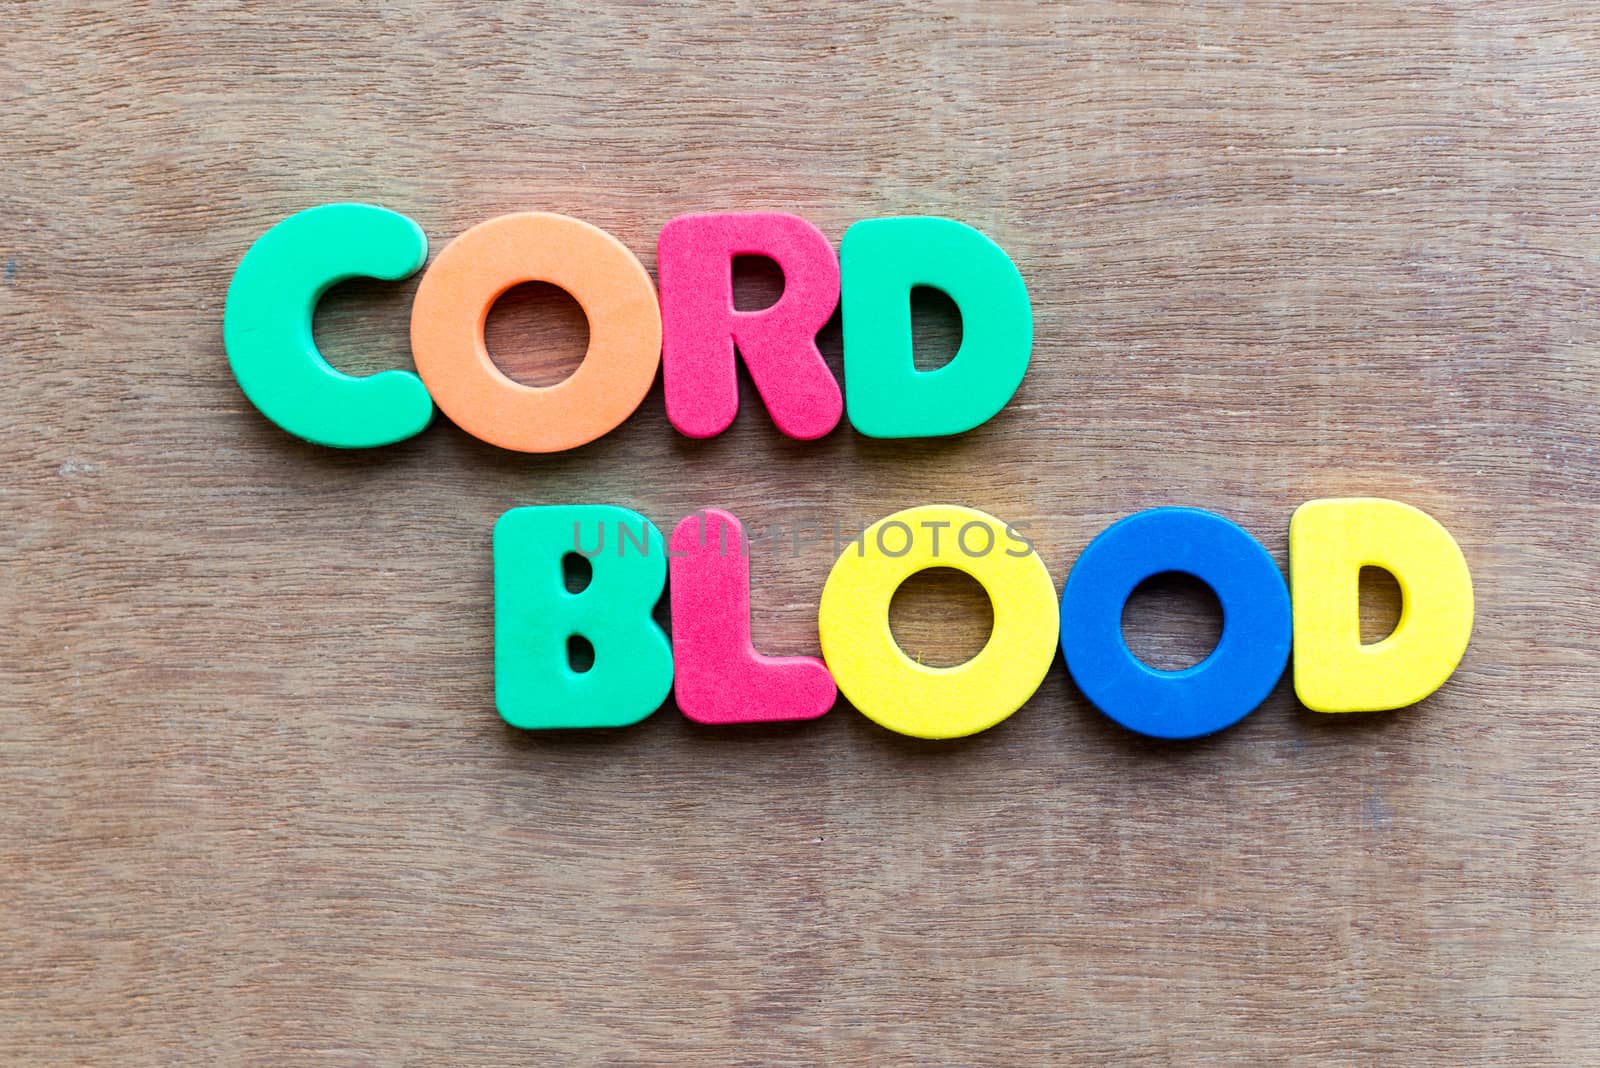 cord blood colorful word in the wooden background